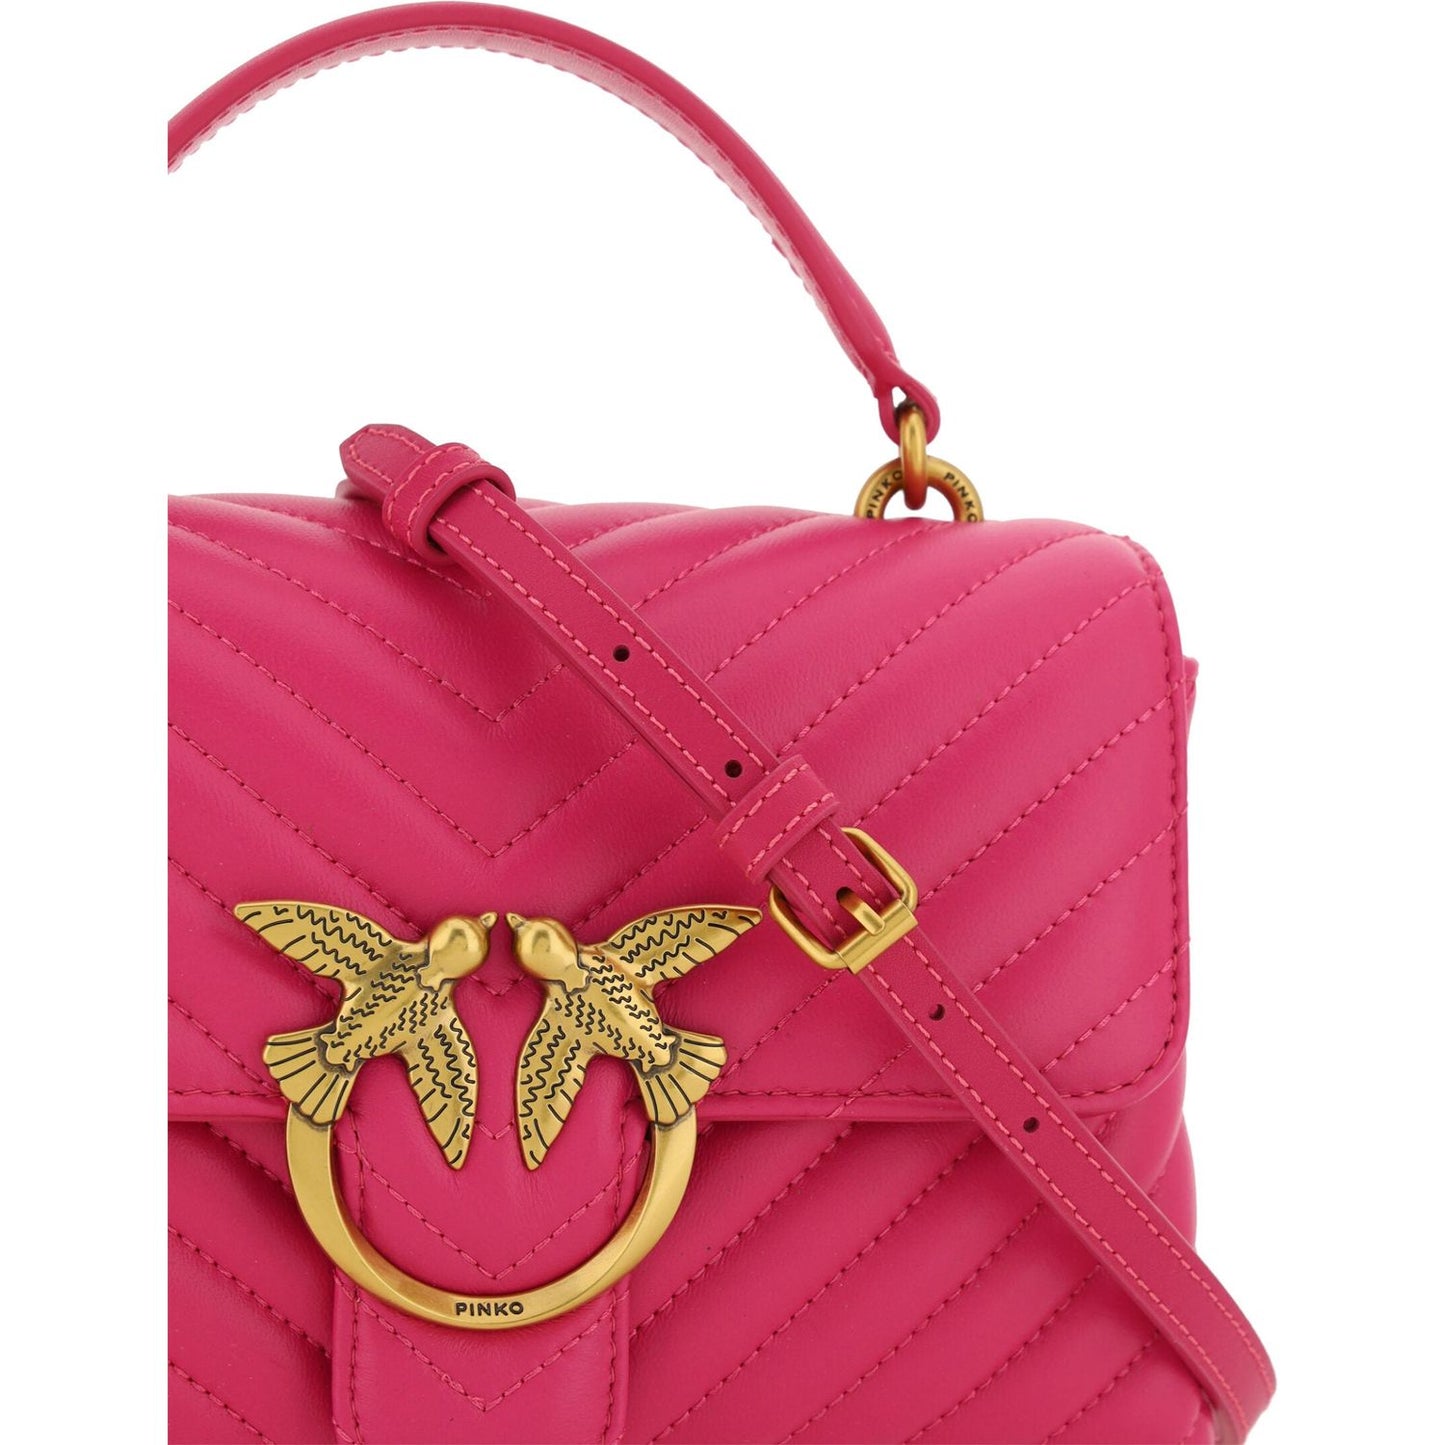 PINKO Chic Pink Quilted Leather Mini Handbag pink-calf-leather-love-lady-mini-handbag-1 9E6067EA-E6BE-4224-B993-A68689283D86-scaled-22bd2e40-a33.jpg